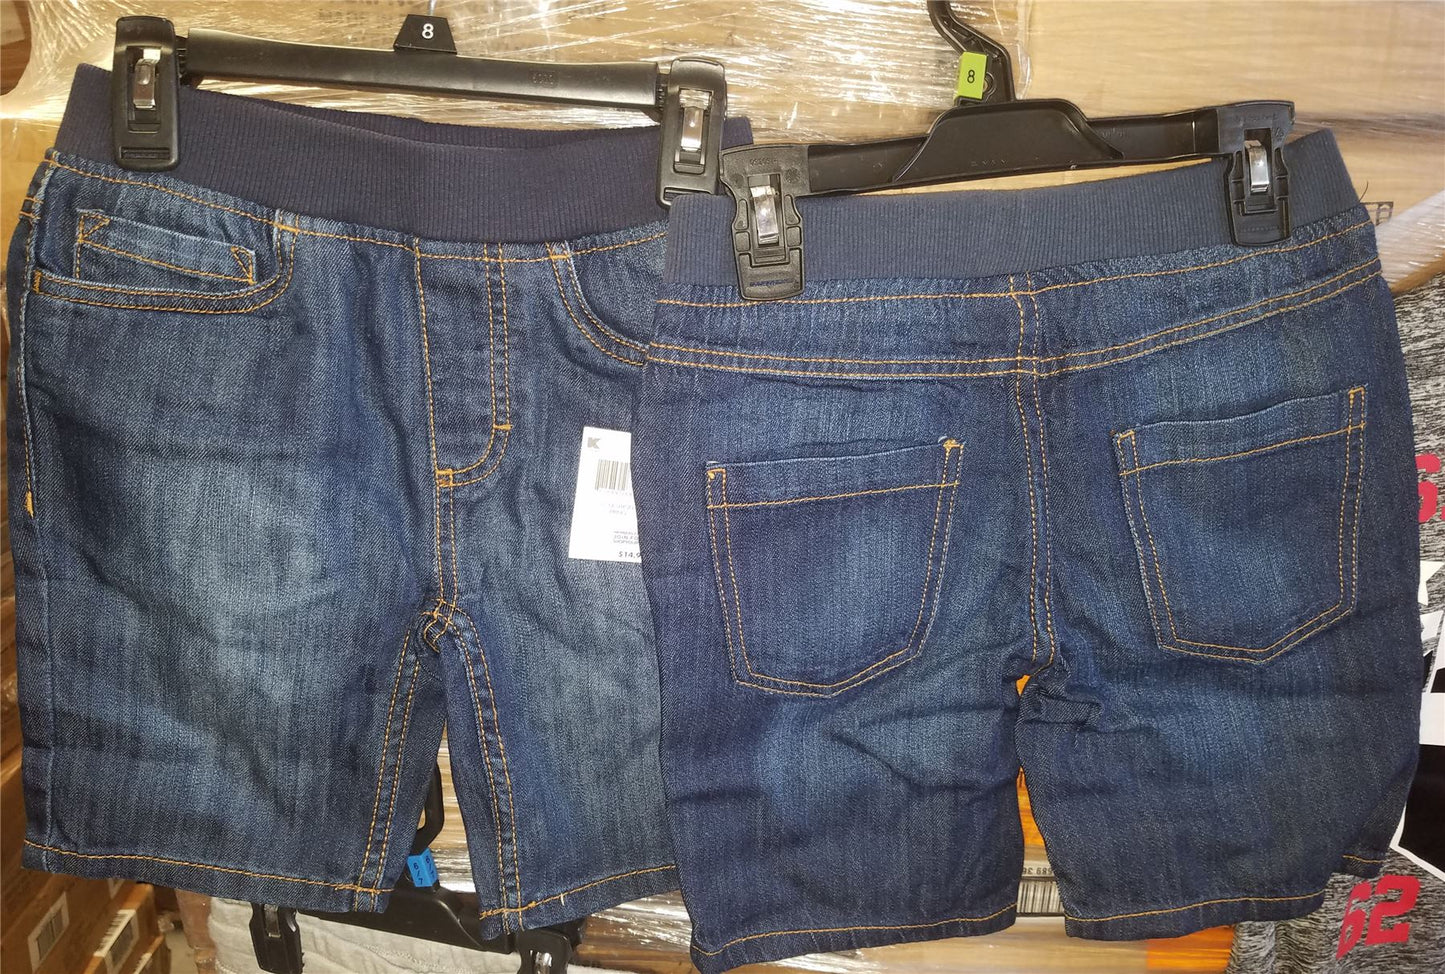 Wholesale Lot of 50 Children Boys Denim and Terry Shorts Brand New Overstock Mixed Sizes